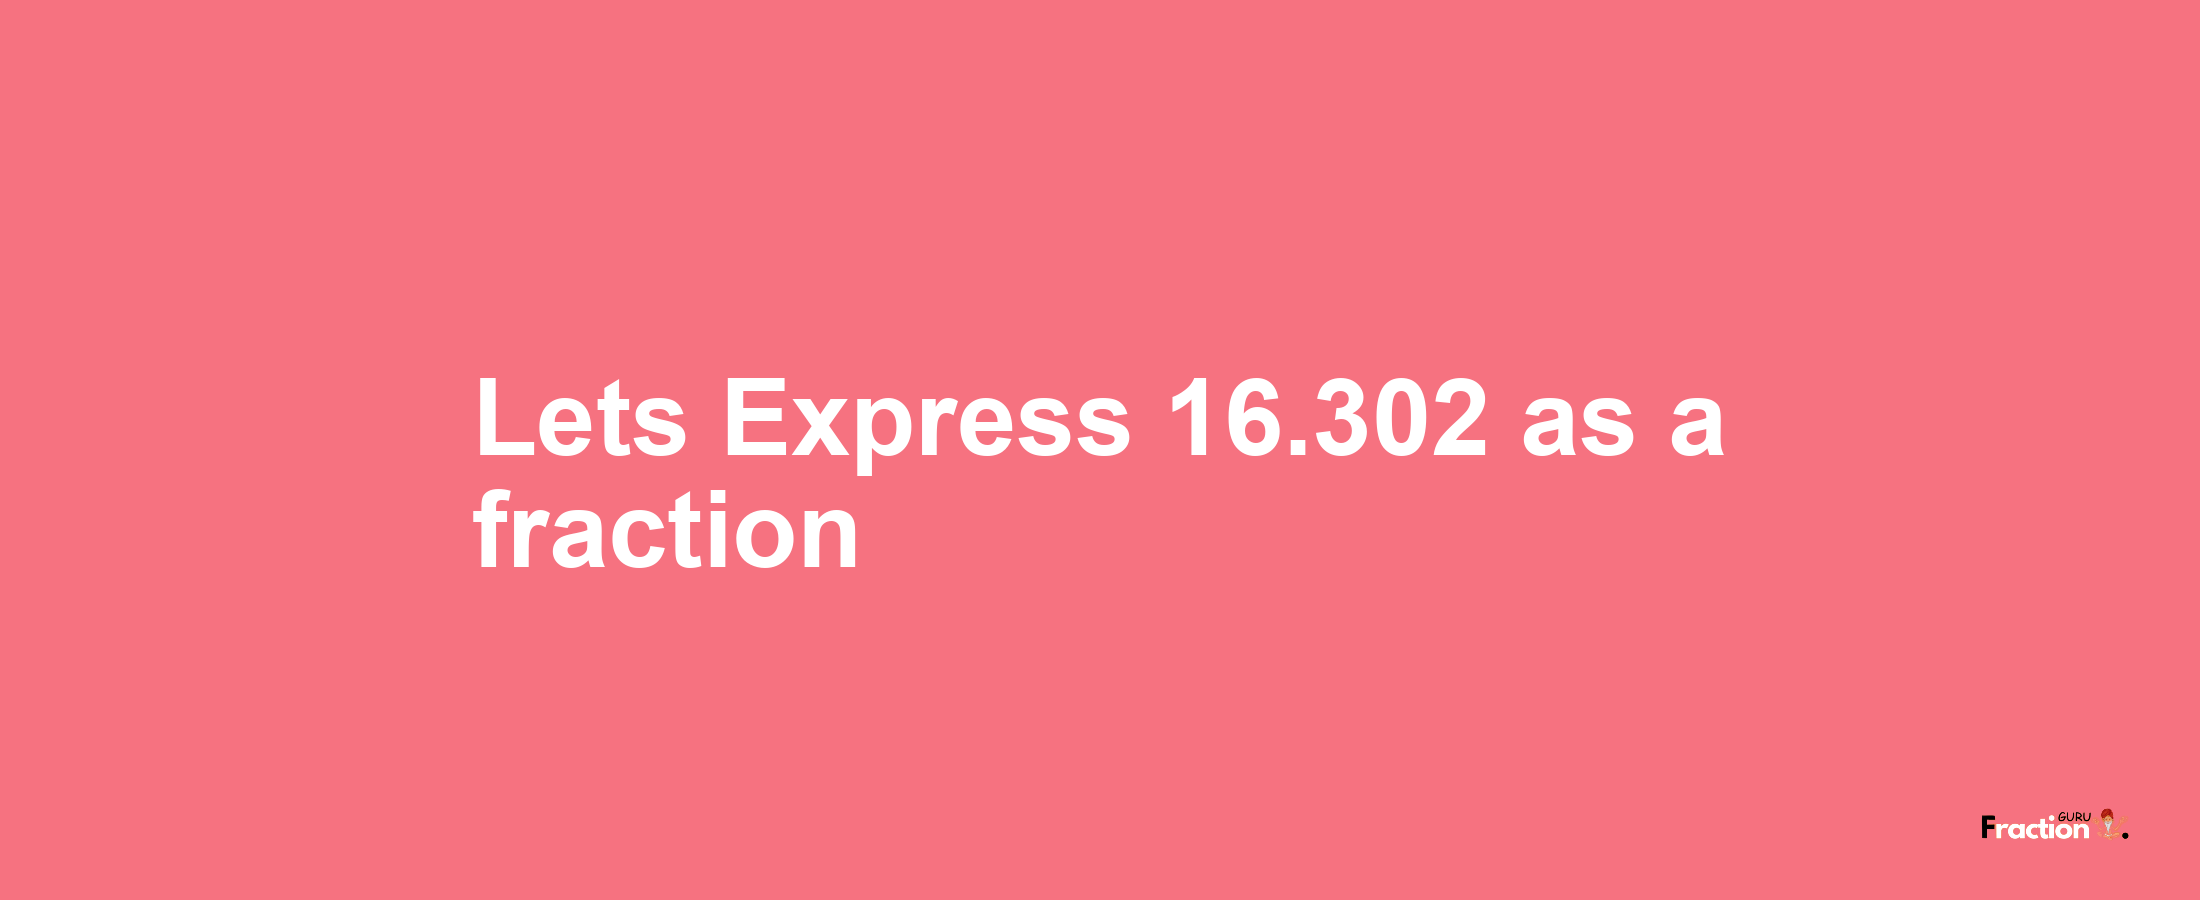 Lets Express 16.302 as afraction